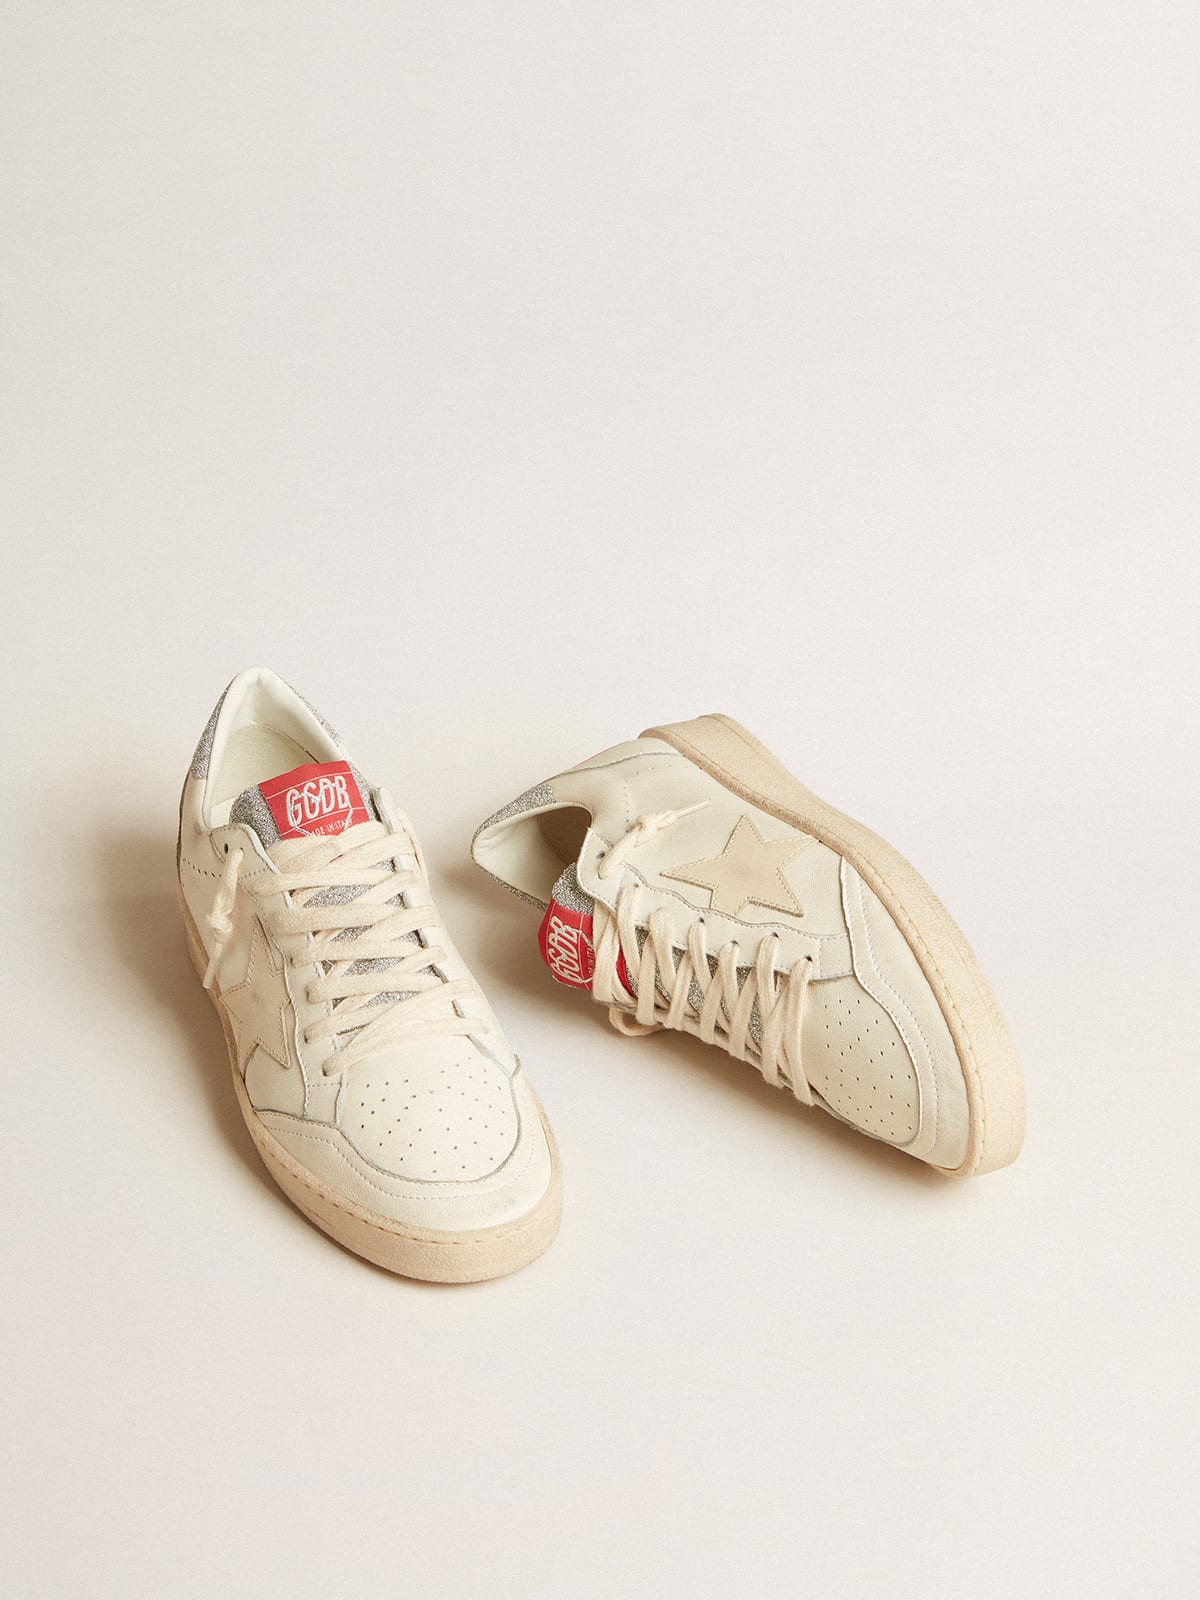 Golden Goose - Men’s Ball Star LTD in nappa with white star and crystal heel tab in 